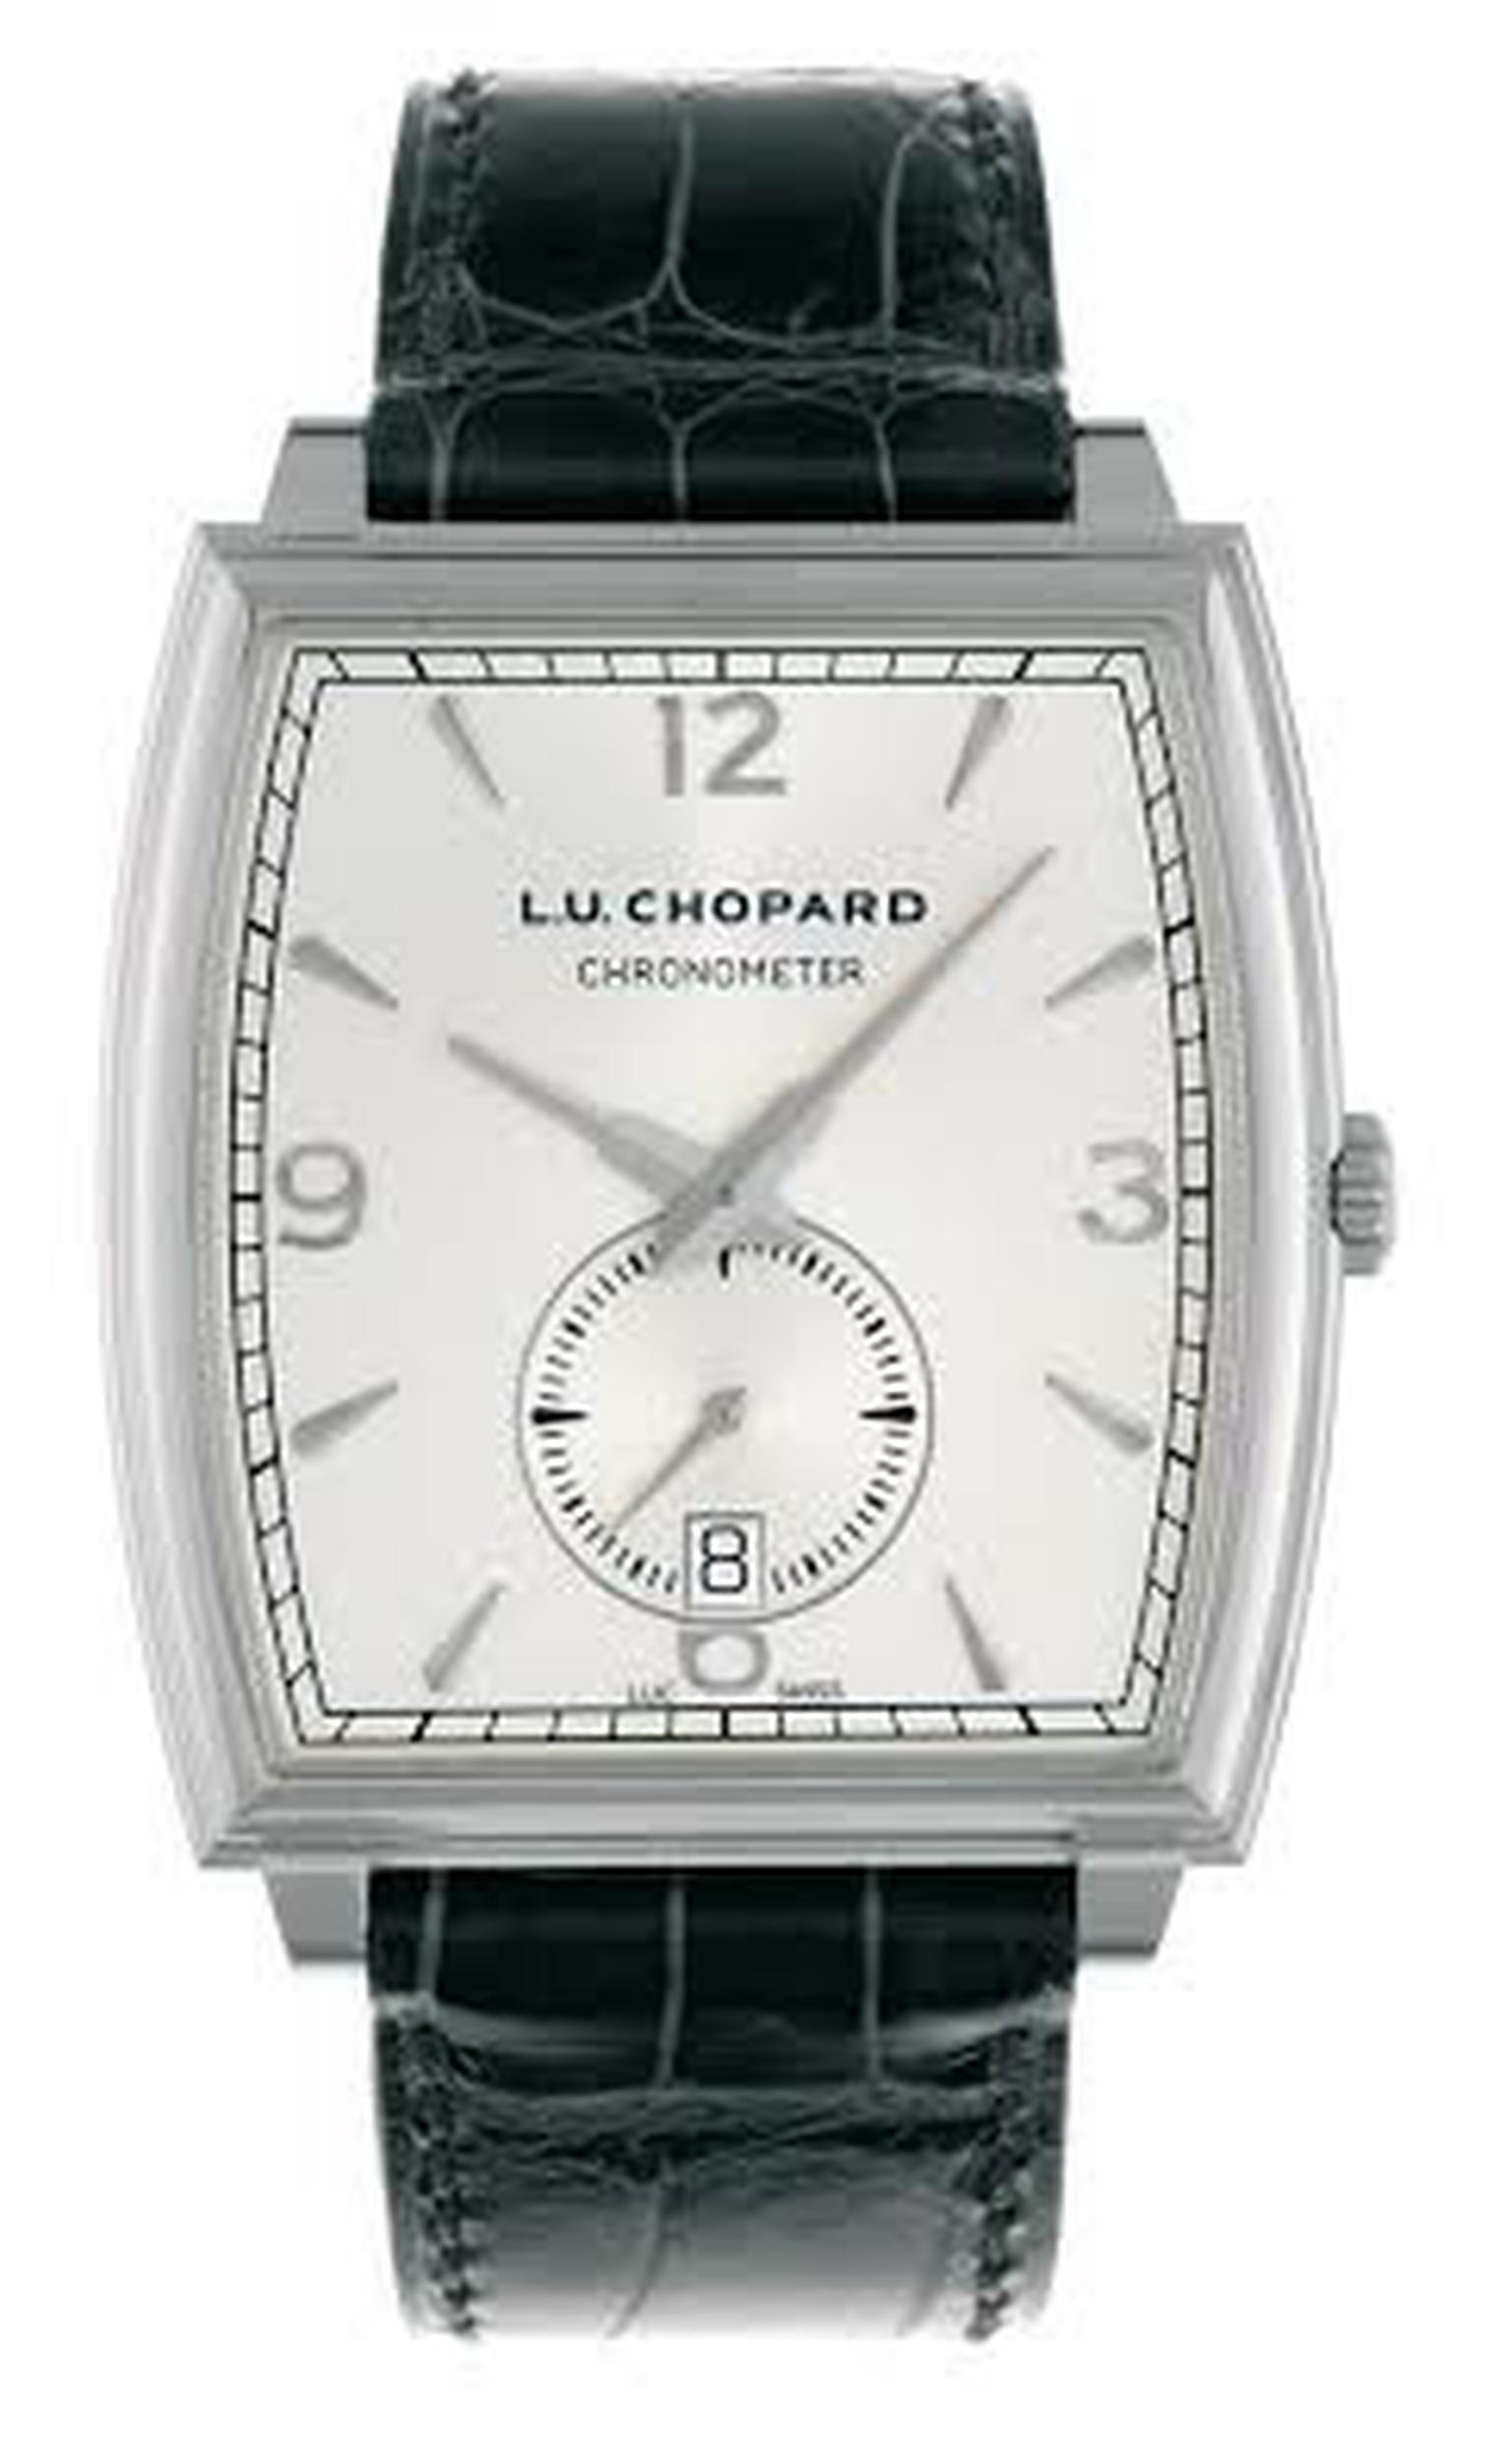 Chopard L.U.C XP Tonneau timepiece crafted in 18-carat white gold, featuring a white dial and black leather strap, worn by Academy Award Winner Matthew McConaughey during the 86th Academy Awards.